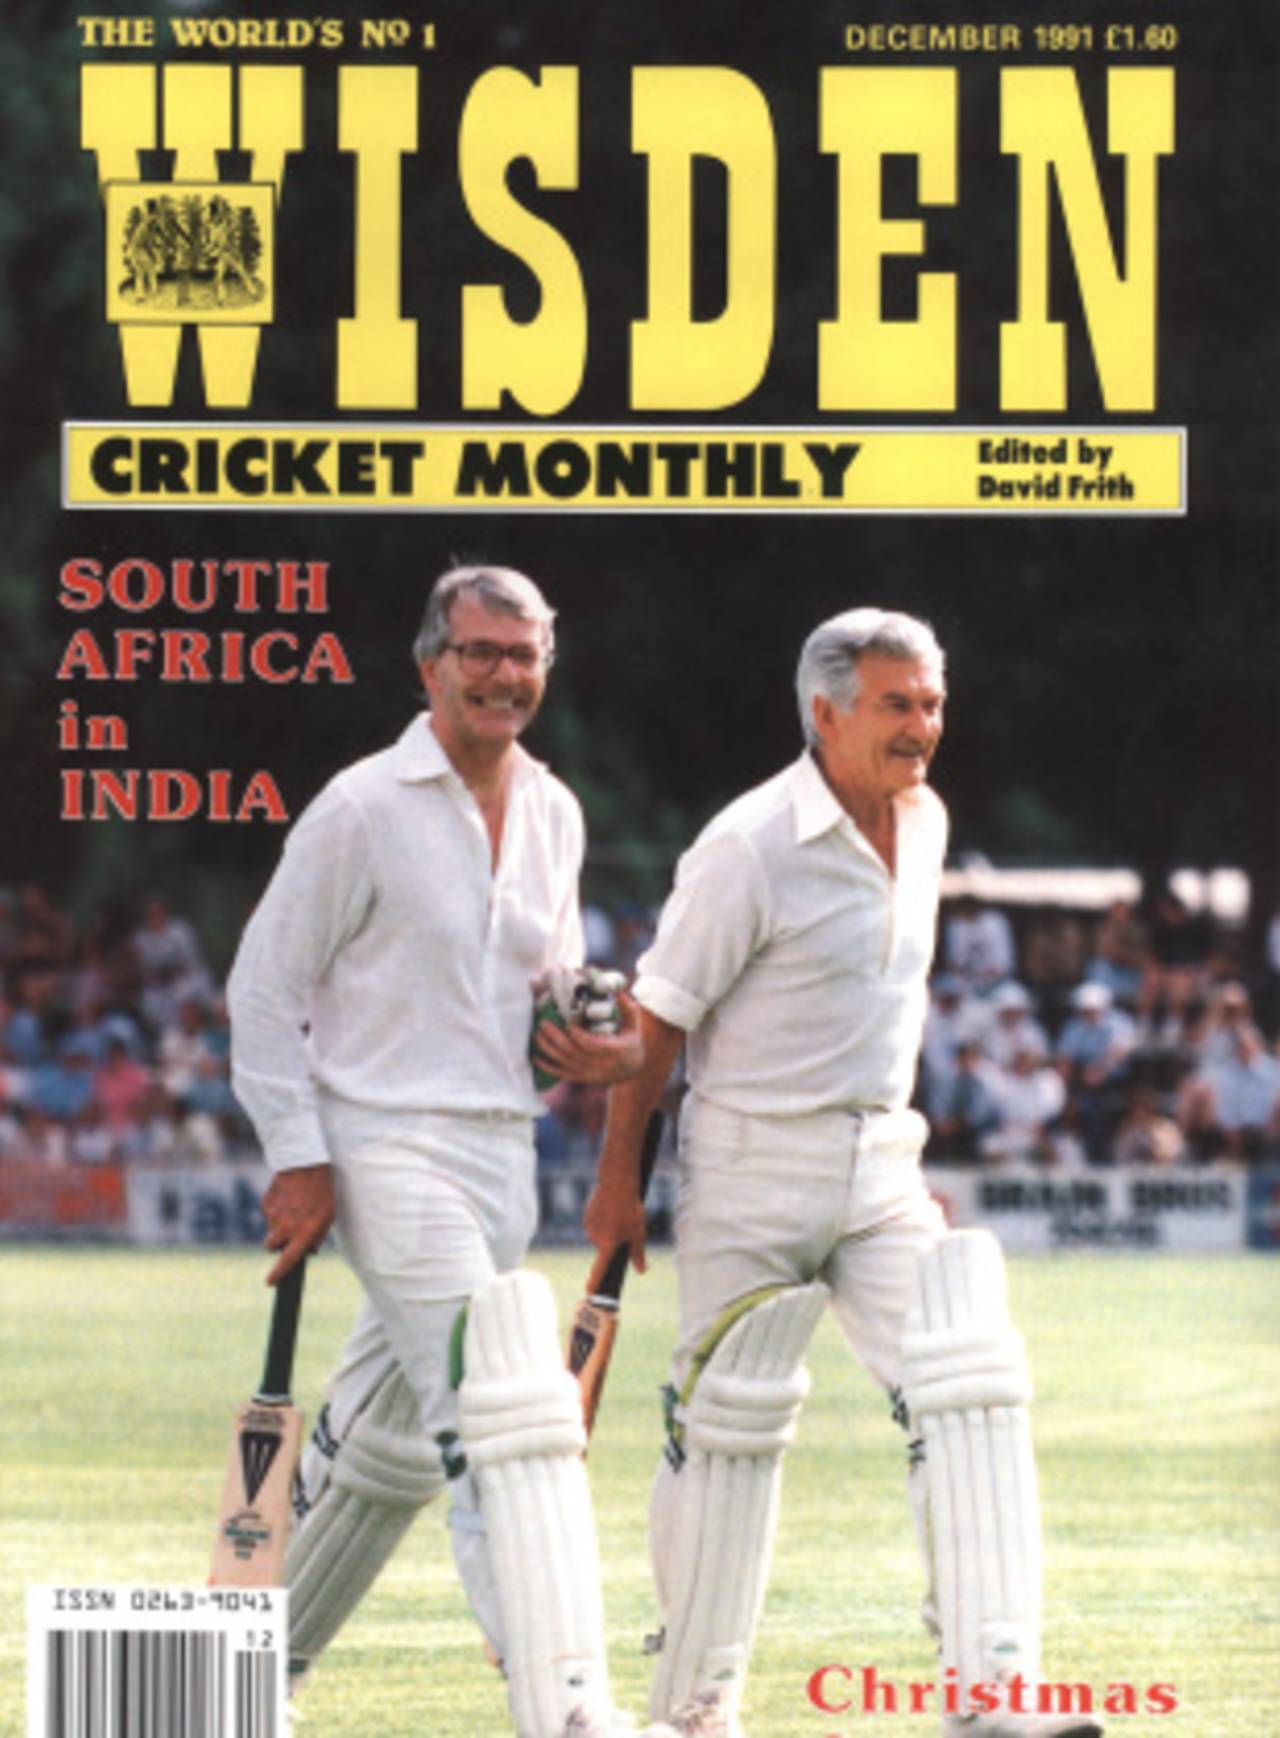 John Major and Bob Hawke, former prime ministers of UK and Australia, on the cover of the December 1991 issue of <i>Wisden Cricket Monthly</i>